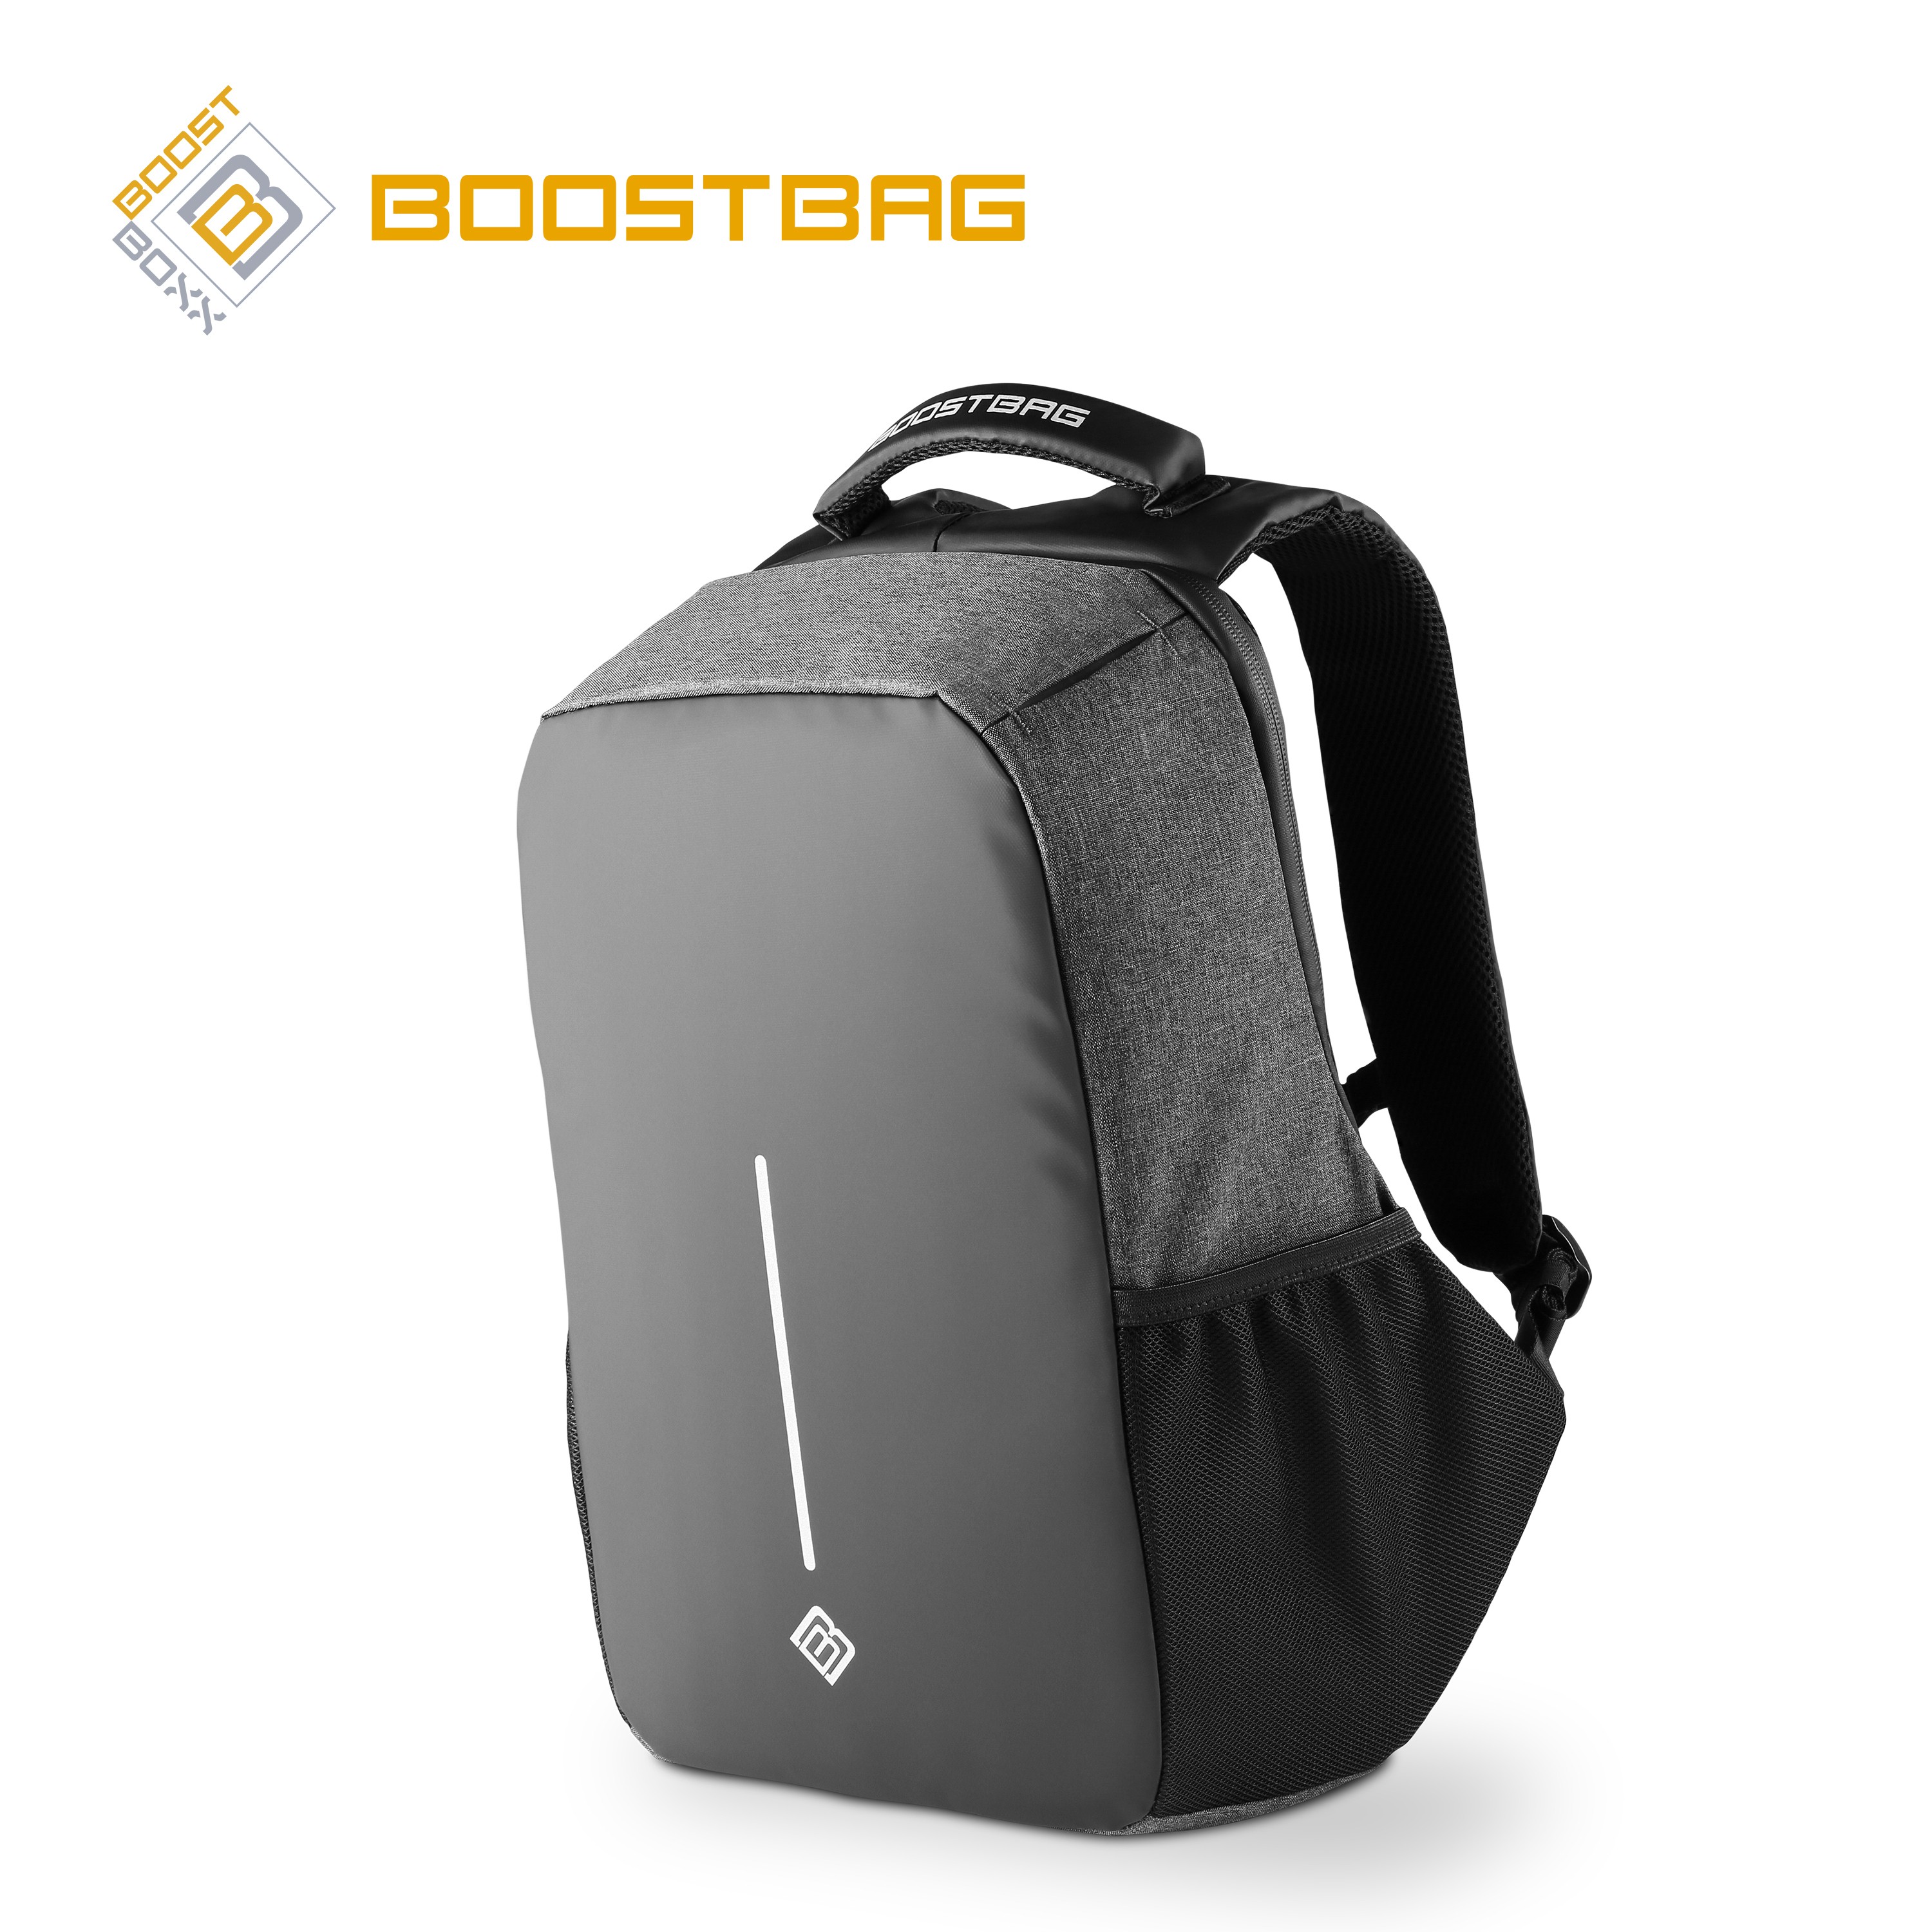 CSL Computer to BoostBoxx Notebook backpack - BoostBag up |